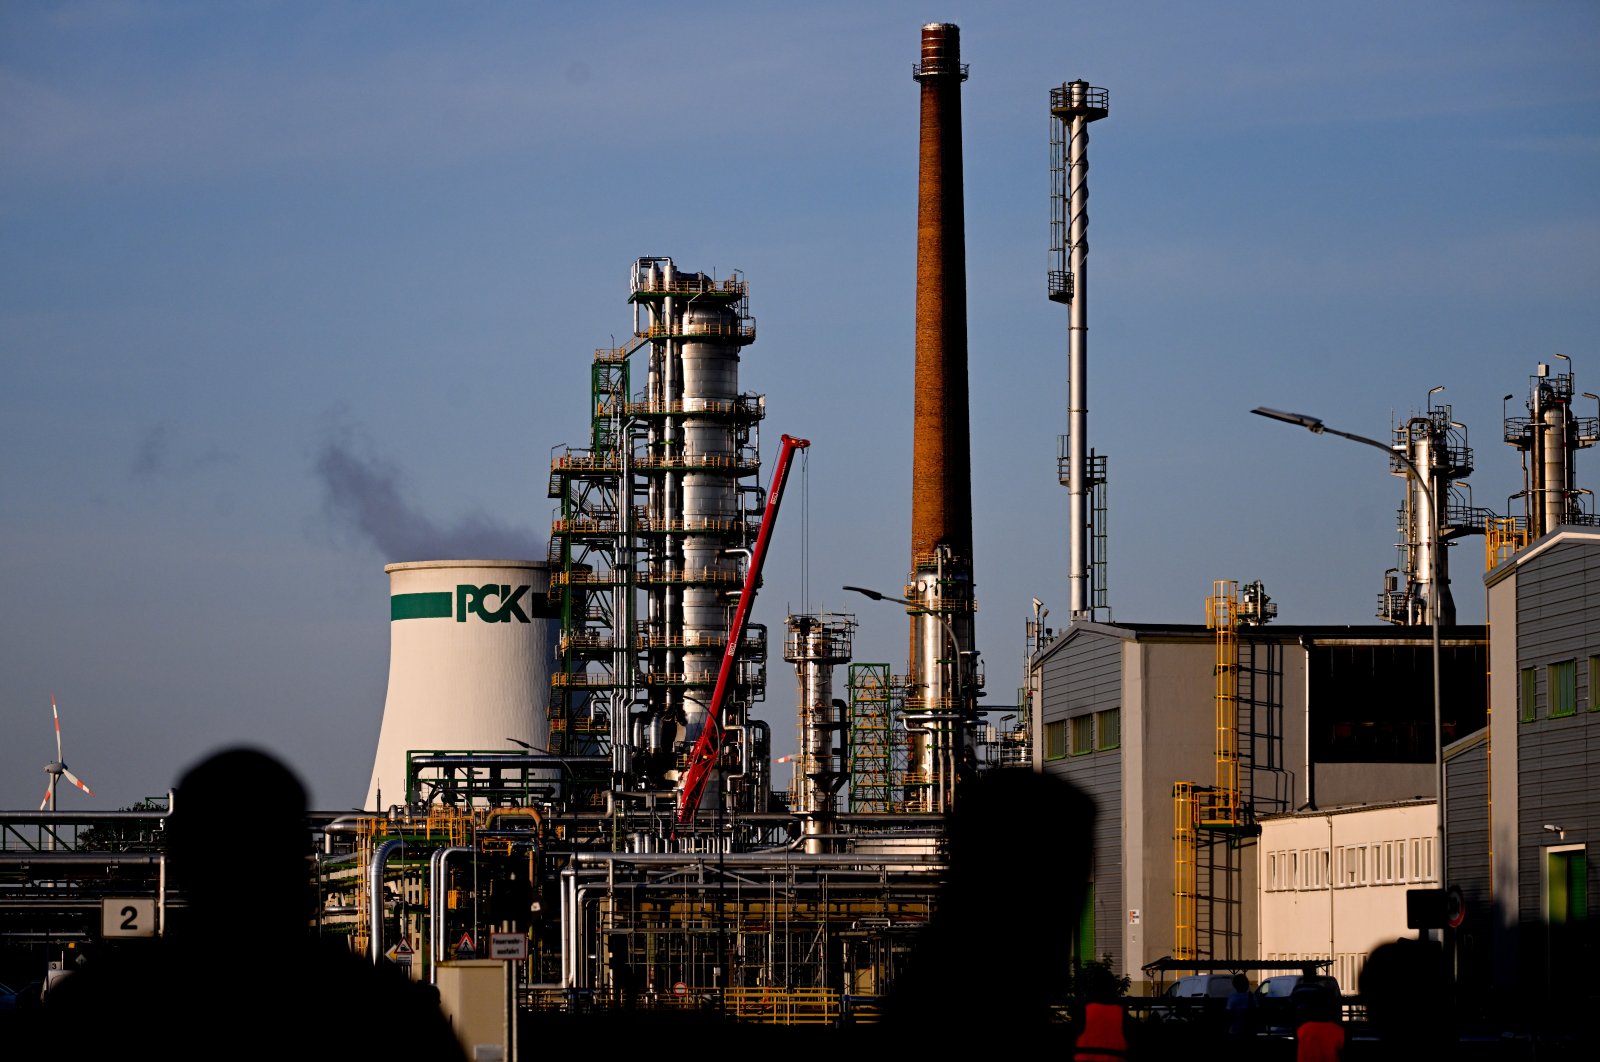 A view of PCK oil refinery in Schwedt, Germany, May 9, 2022. (EPA Photo)